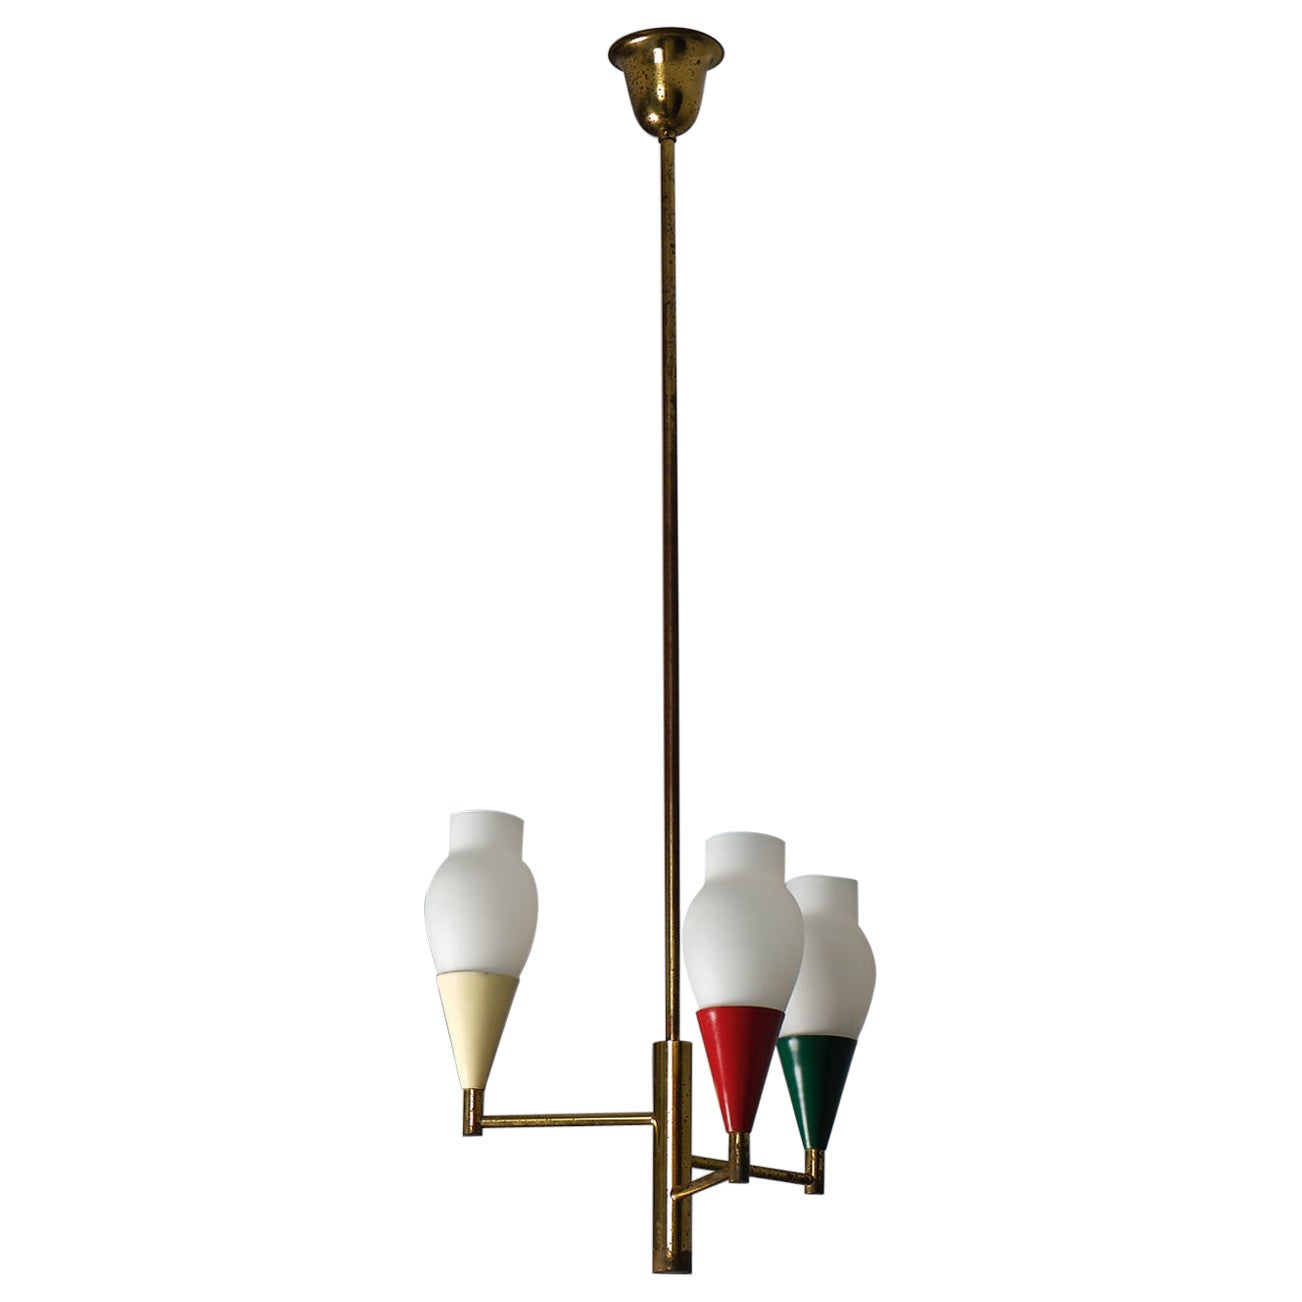 1950s Italian Brass Chandelier with Modern Design and Colorful Metal Accents For Sale